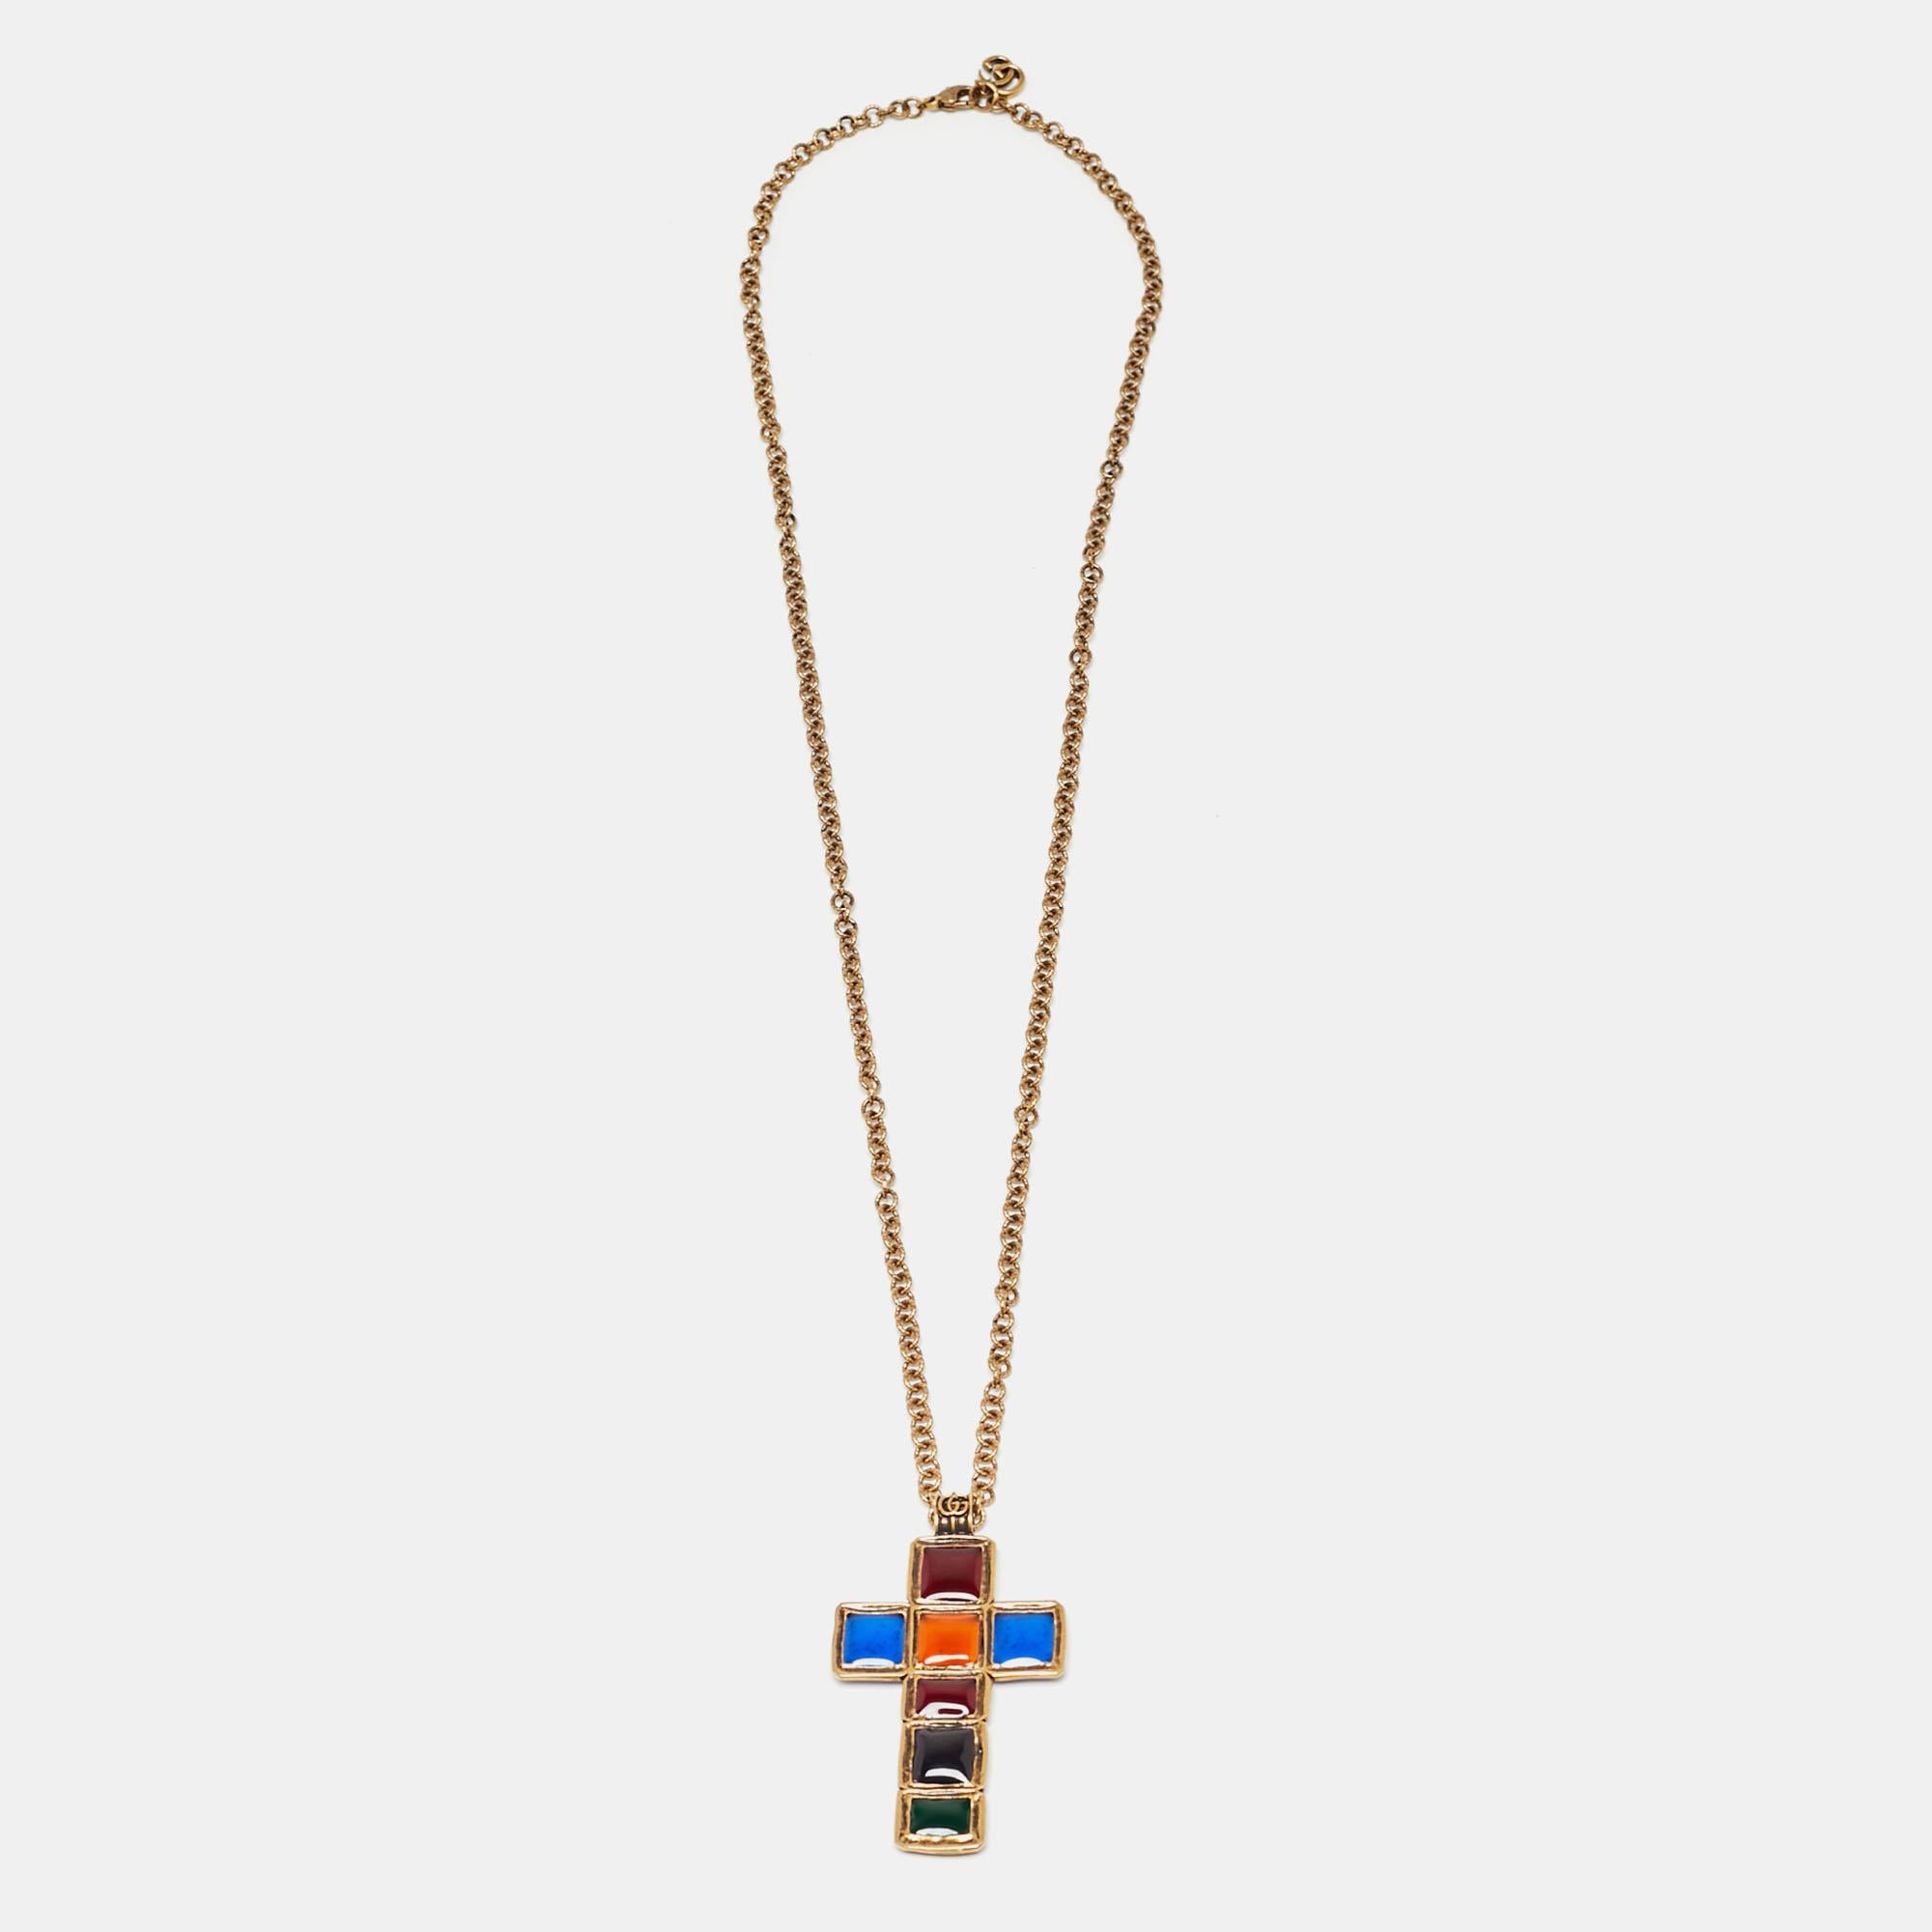 This beautiful necklace from Gucci is effortlessly chic and perfect with both a day and evening look. Made of gold-tone metal, it has a cross pendant set with colorful gripoix.

Includes: Original Dustbag, Original Box,
